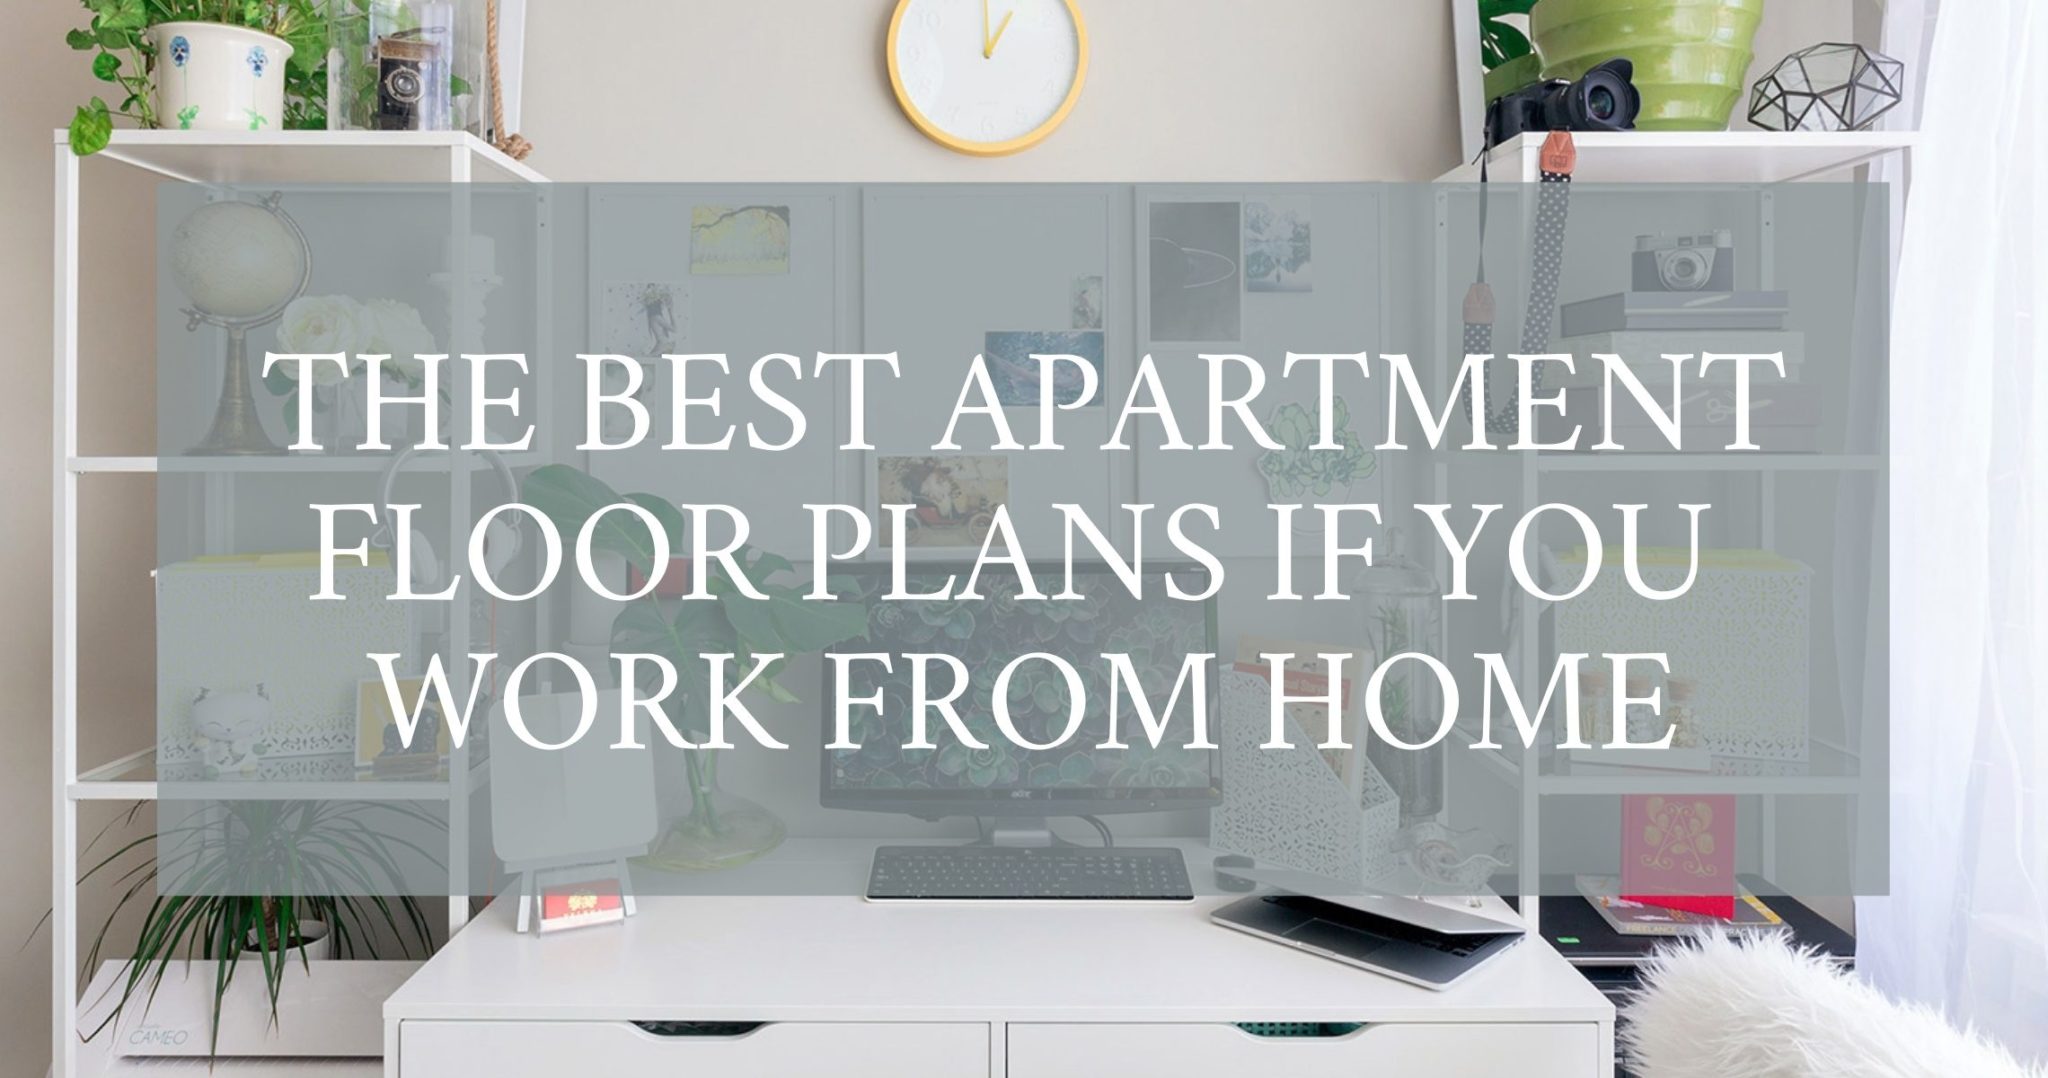 The best apartment floor plans if you work from home.